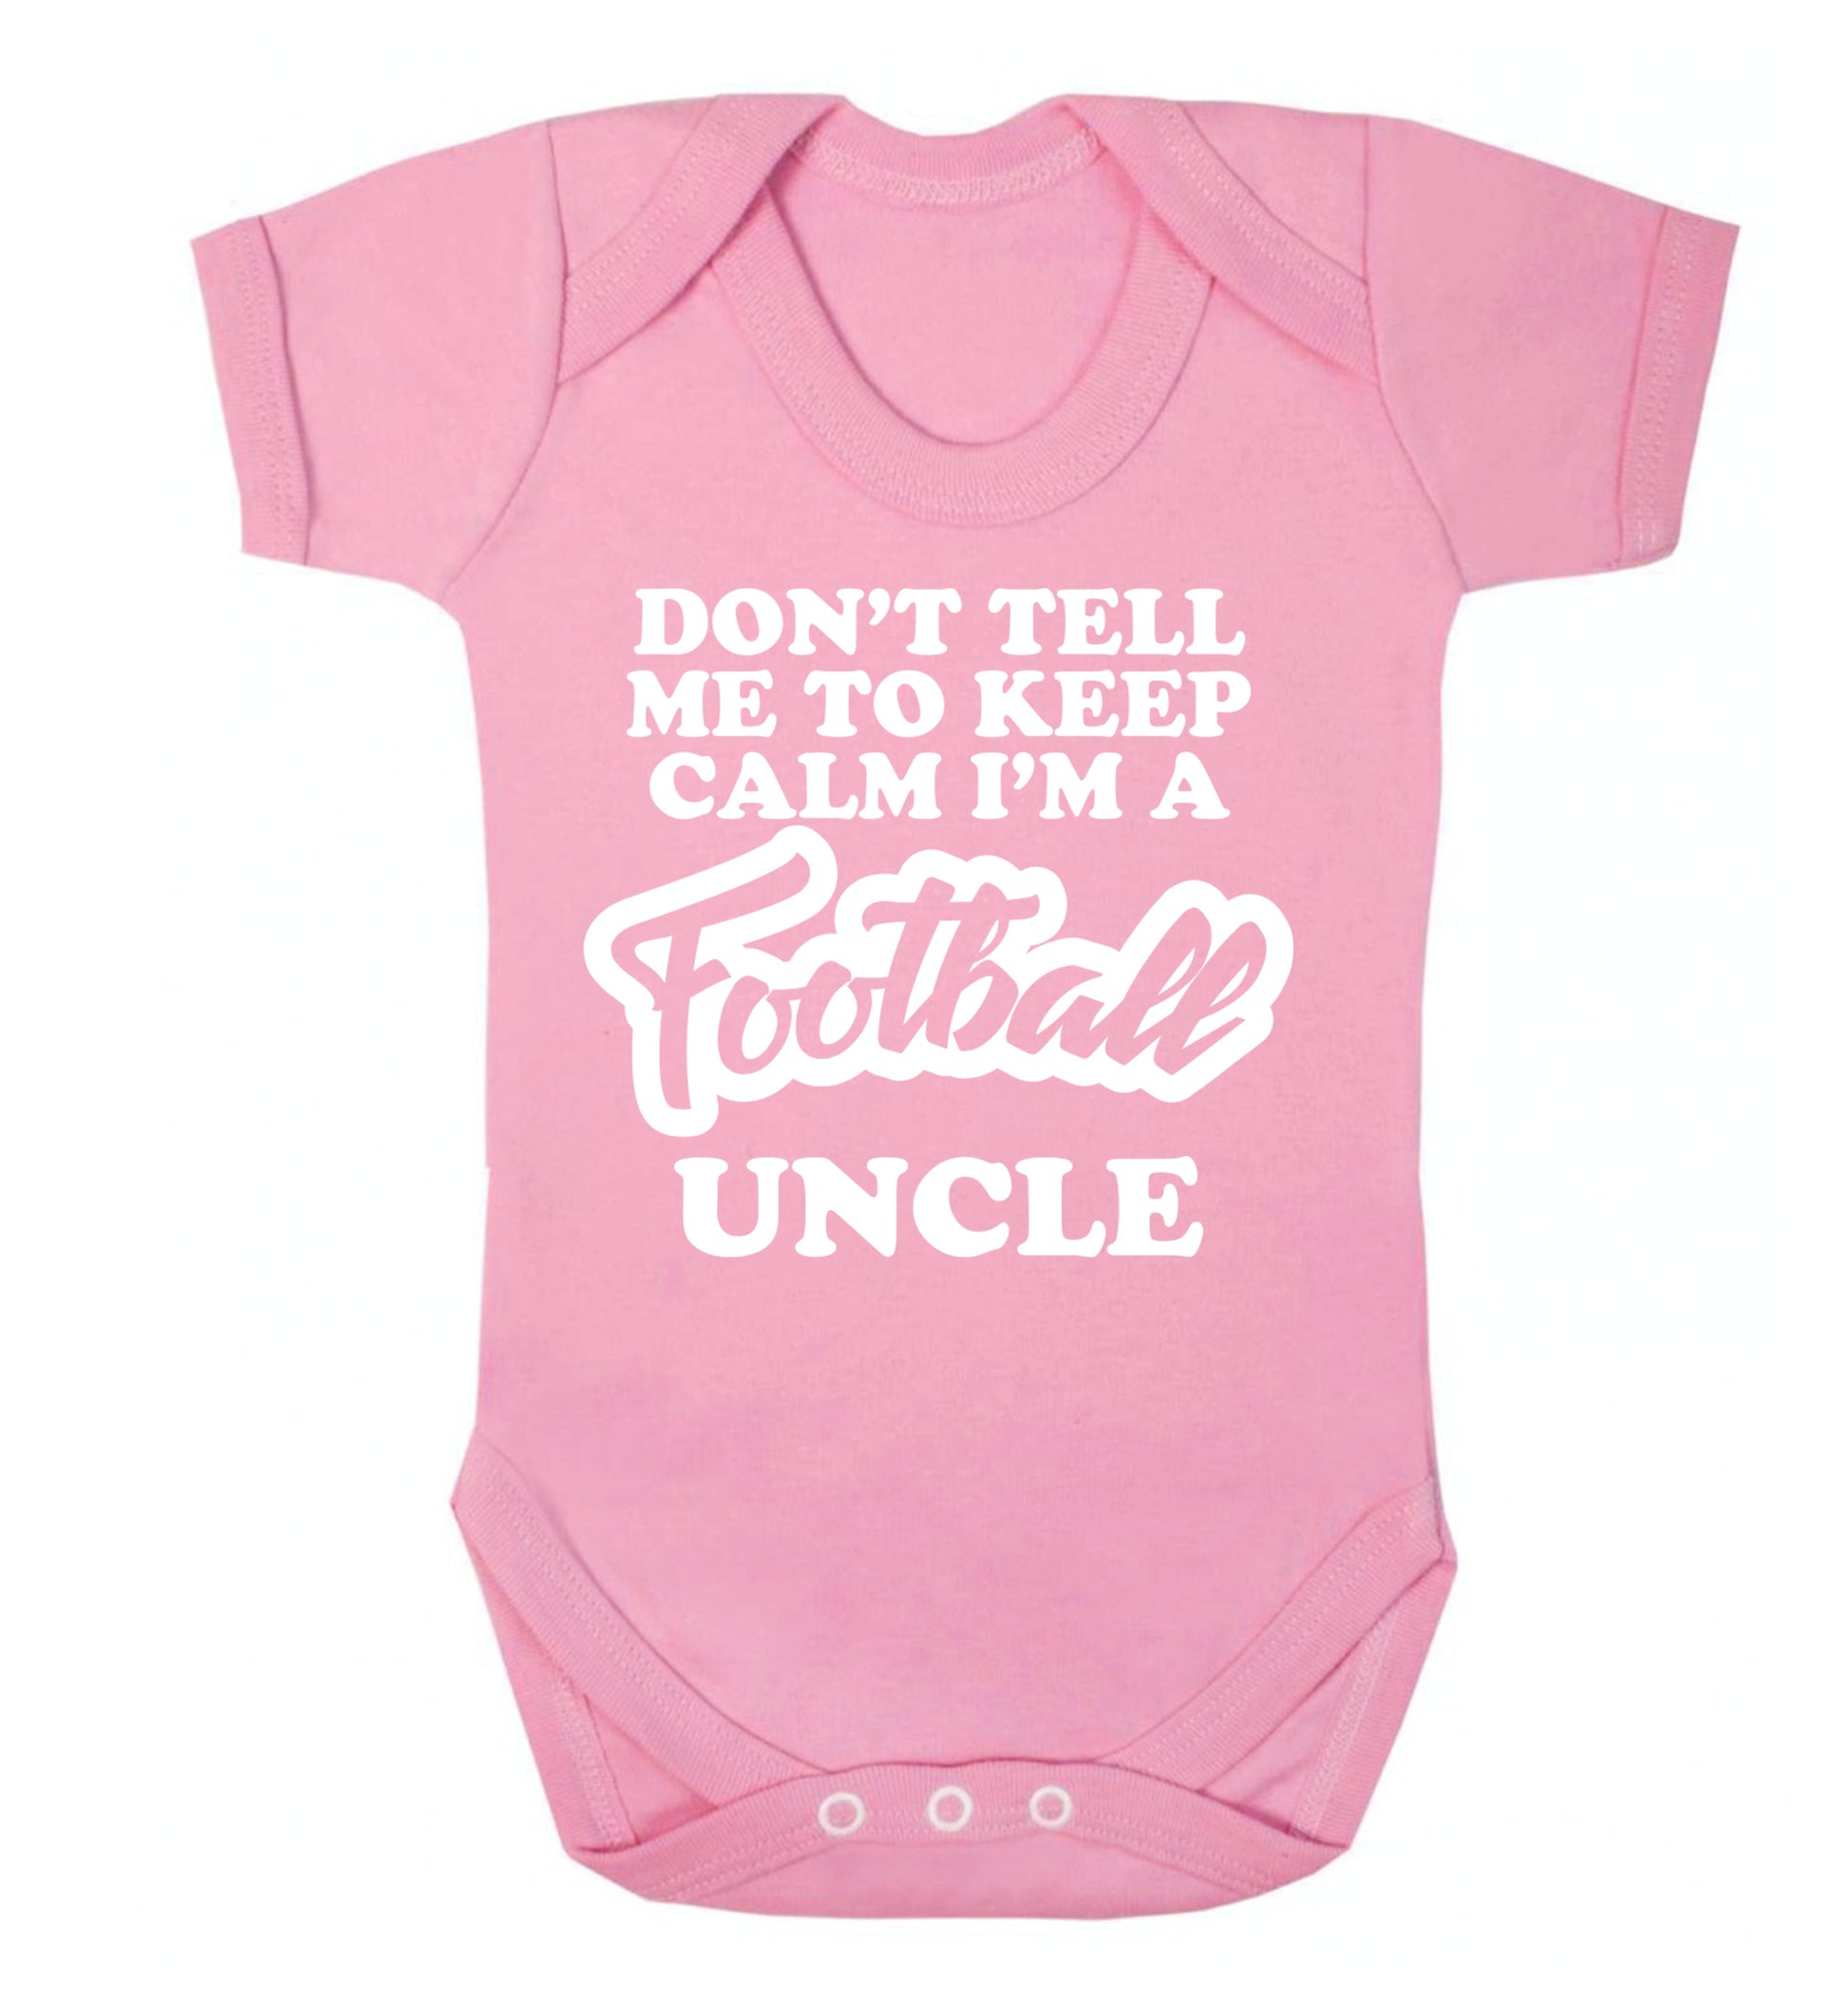 Don't tell me to keep calm I'm a football uncle Baby Vest pale pink 18-24 months